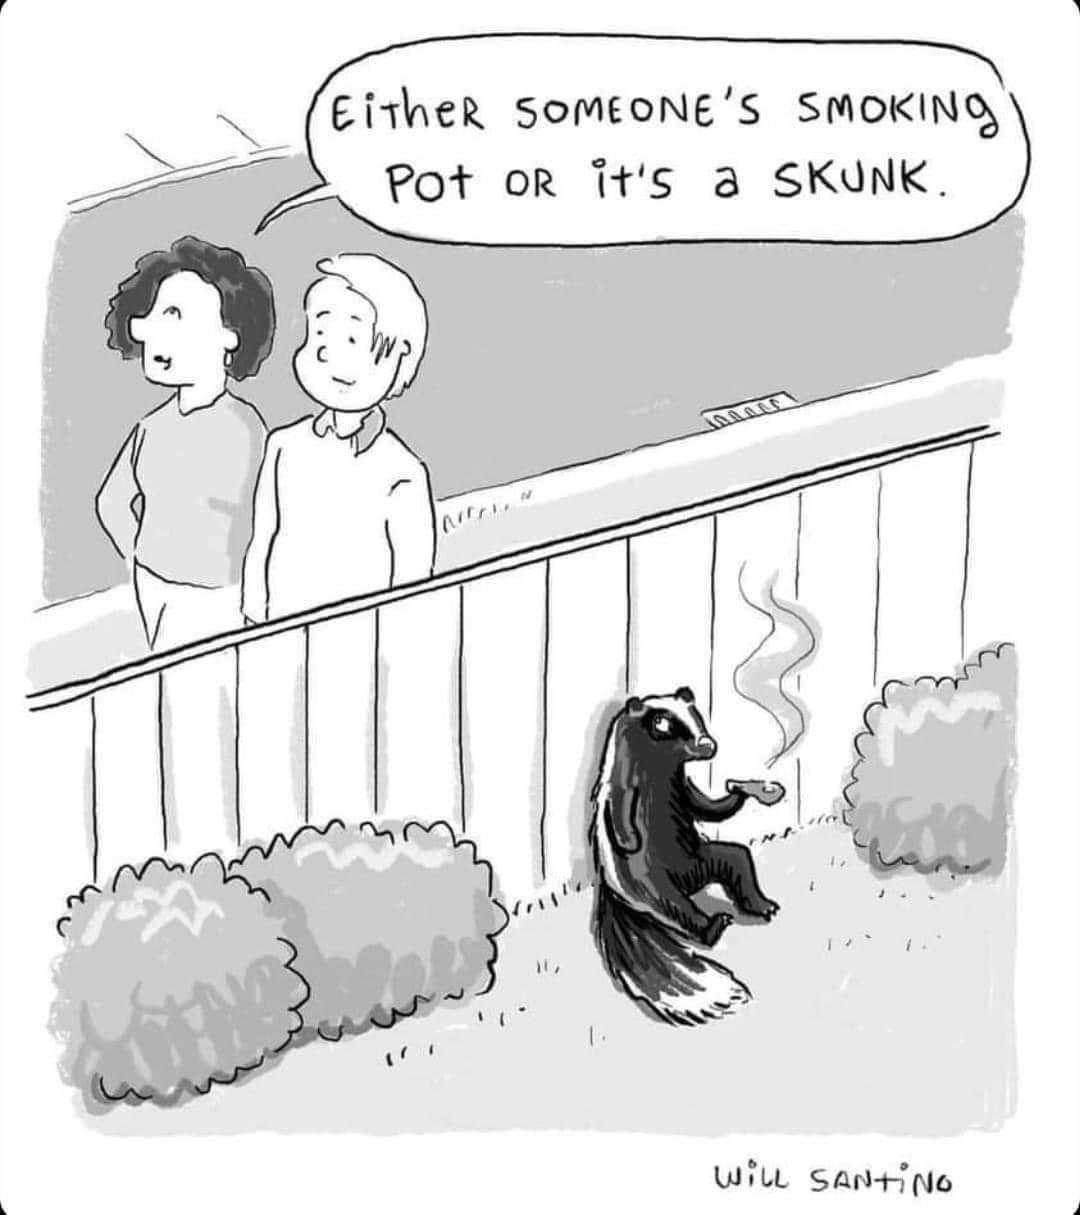 best memes of the week - cartoon - EitheR Someone'S Smoking Pot Or it's a Skunk. 151 How N 100000 WiLL Santing